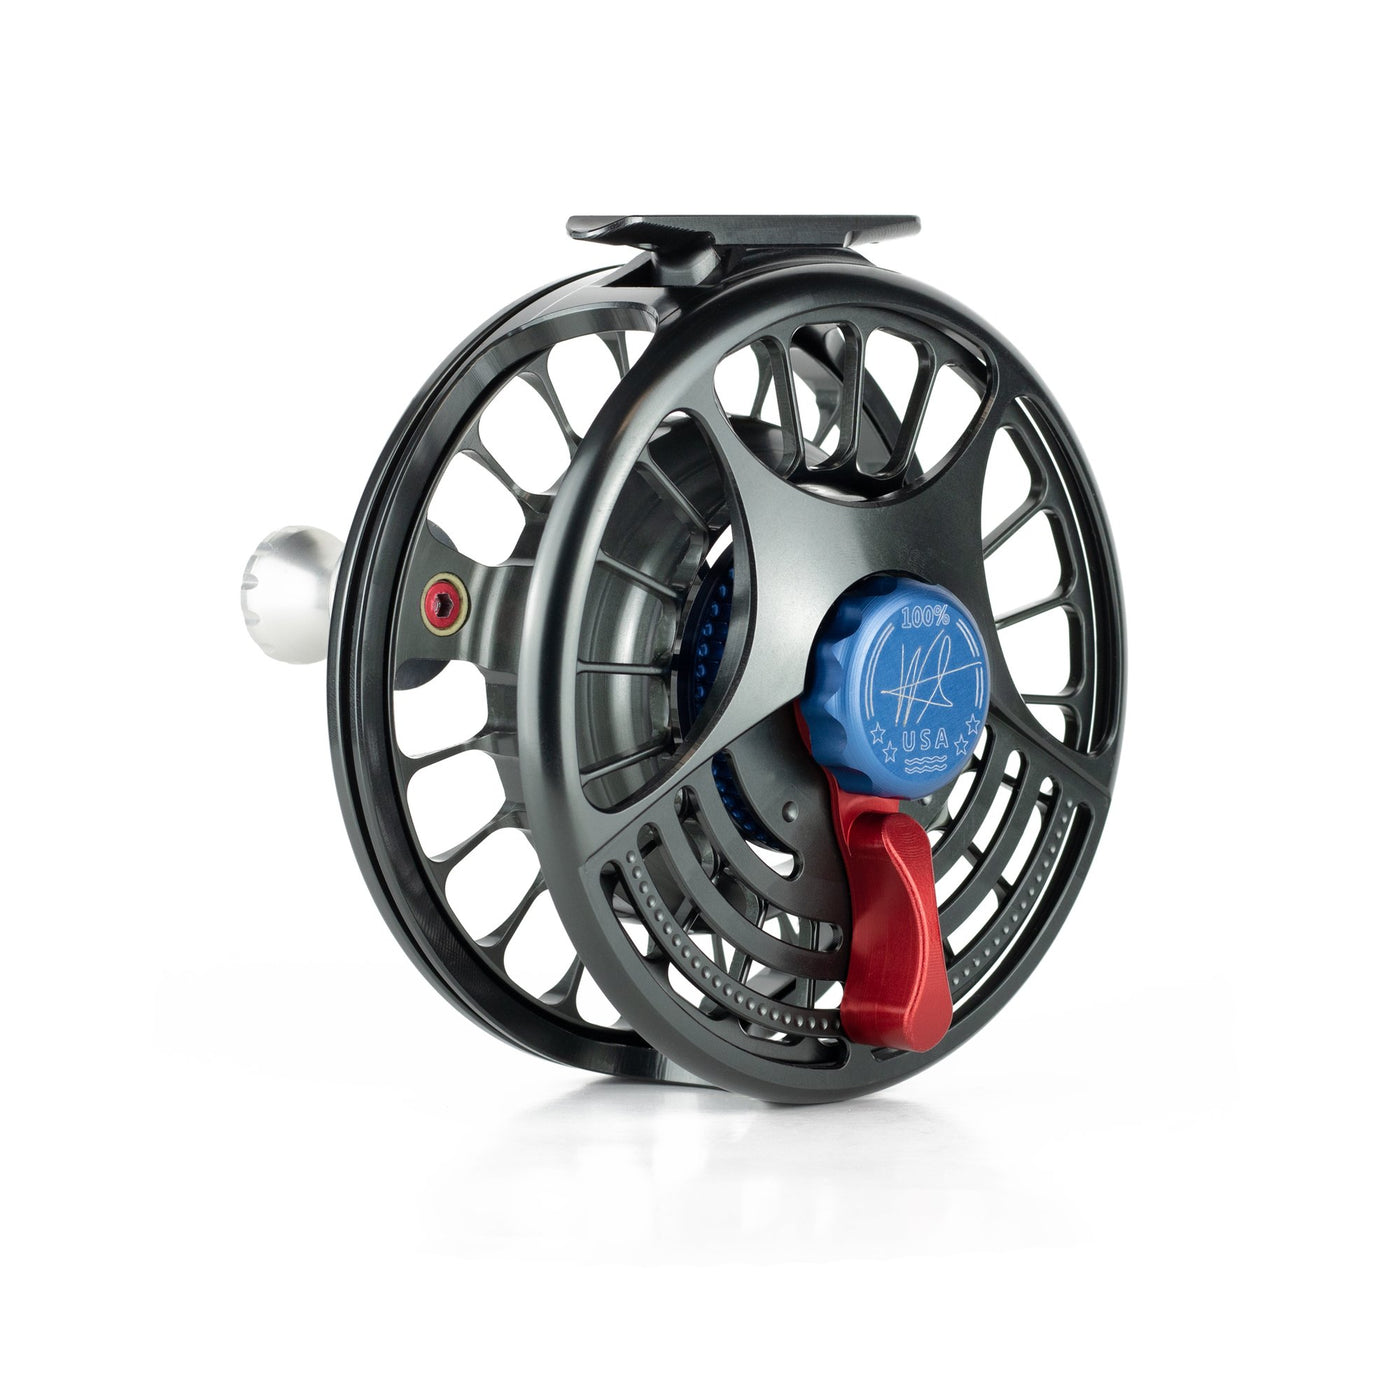 Seigler BF (Big Fly) Lever Drag Fly Reel – White Water Outfitters